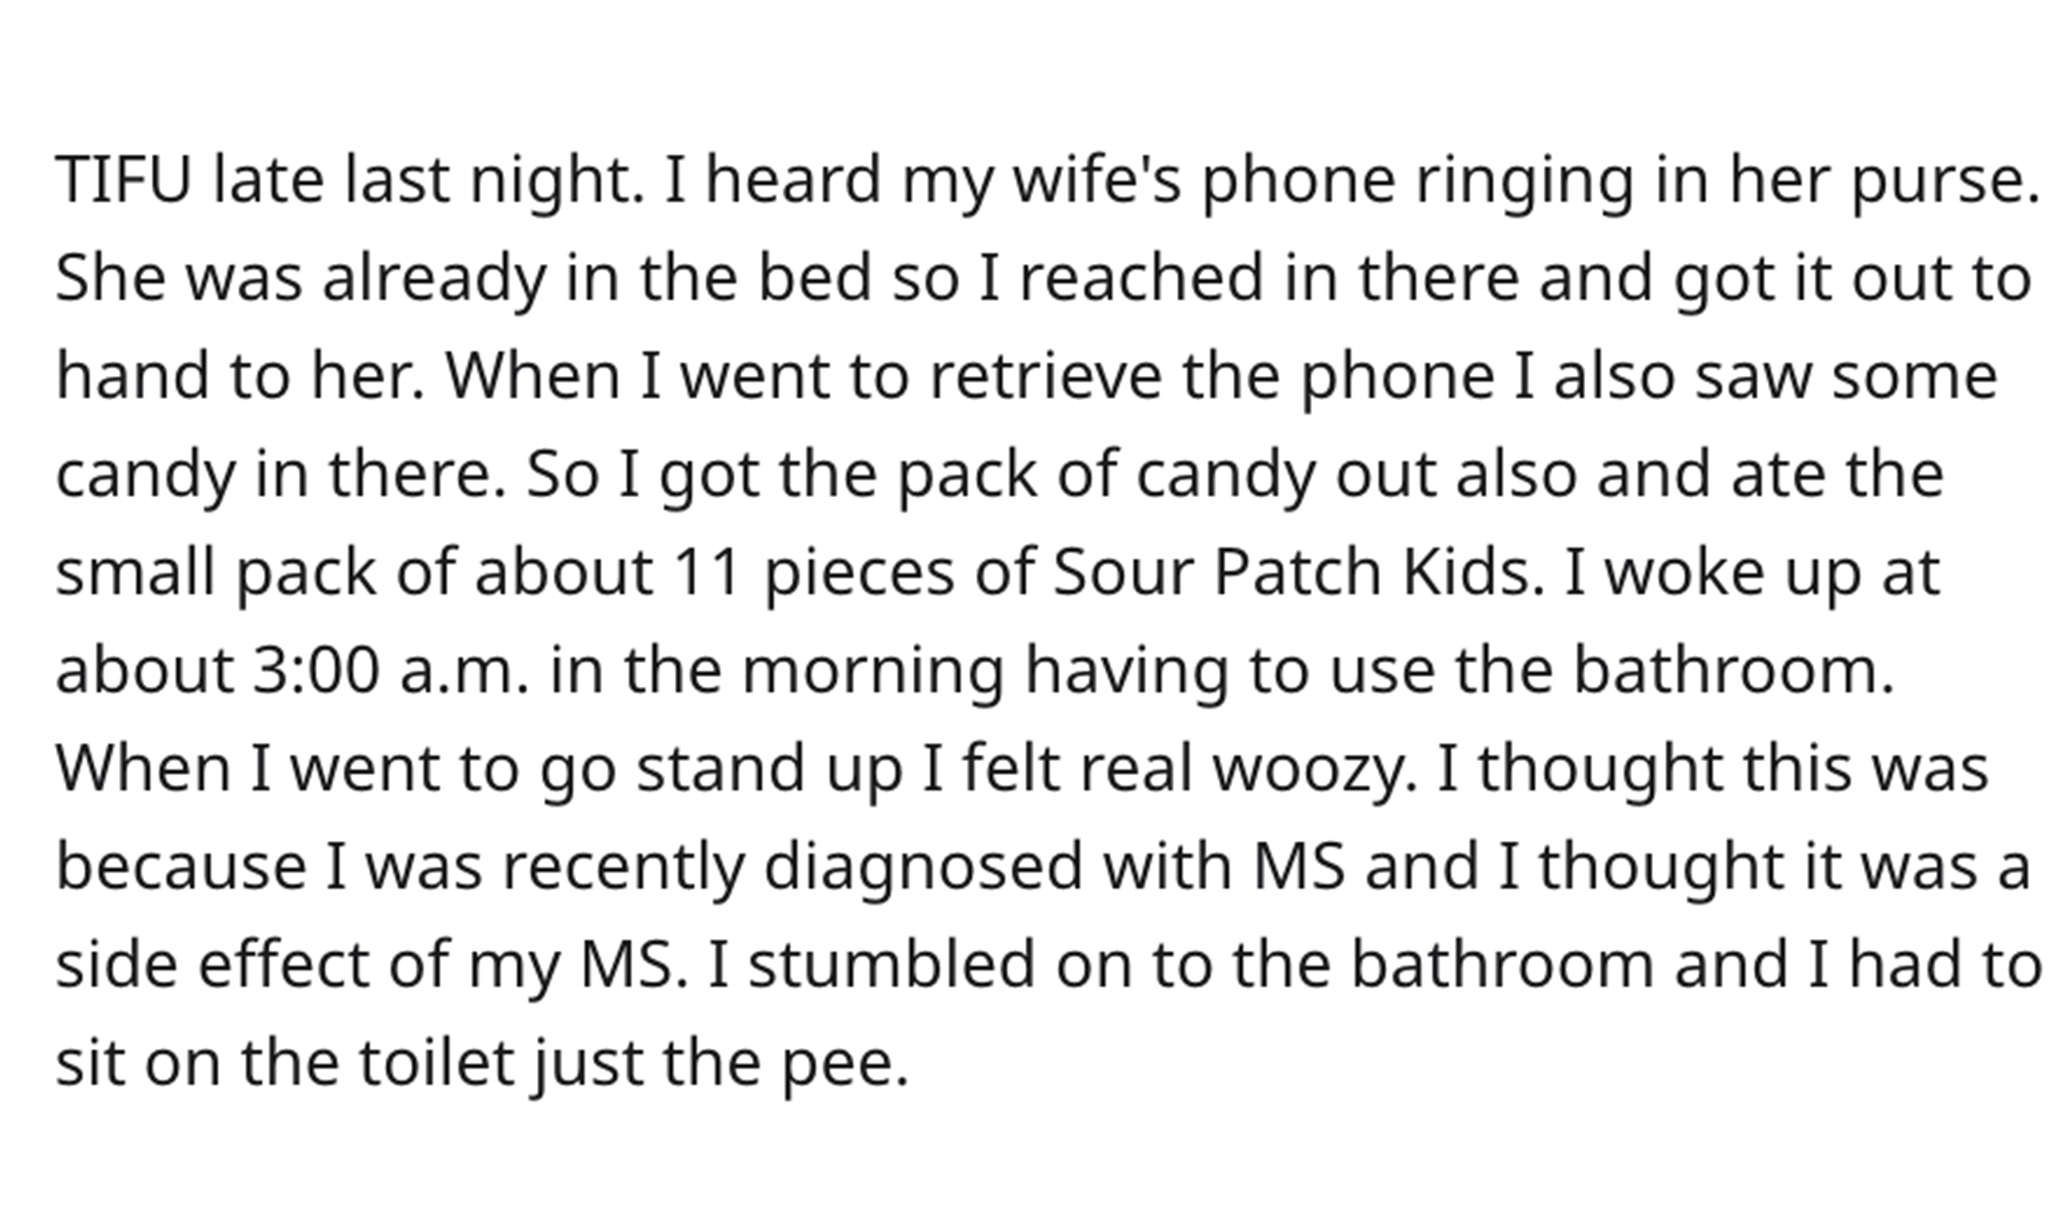 Stoney Patch Kids story reddit - document - Tifu late last night. I heard my wife's phone ringing in her purse. She was already in the bed so I reached in there and got it out to hand to her. When I went to retrieve the phone I also saw some candy in ther